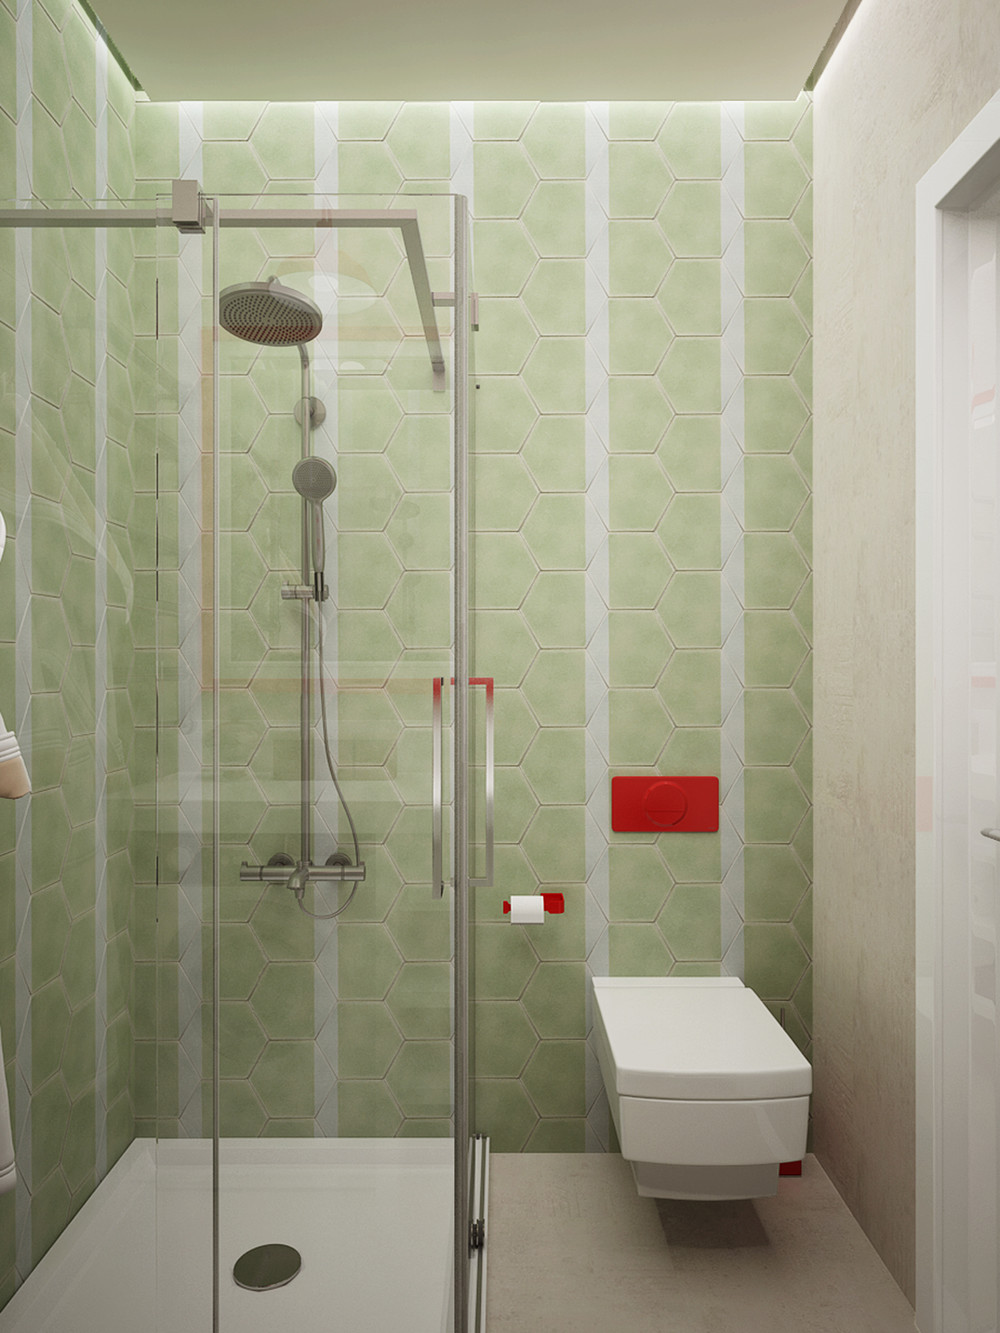 Bathroom design for green tiles "width =" 1000 "height =" 1333 "srcset =" https://mileray.com/wp-content/uploads/2020/05/1588515625_857_Small-Minimalist-Bathroom-Designs-Decorated-With-Variety-of-Modern-Pattern.jpg 1000w, https://mileray.com /wp-content/uploads/2016/10/Irina-Ovsyannikov-225x300.jpg 225w, https://mileray.com/wp-content/uploads/2016/10/Irina-Ovsyannikov-768x1024.jpg 768w, https: / /mileray.com/wp-content/uploads/2016/10/Irina-Ovsyannikov-696x928.jpg 696w, https://mileray.com/wp-content/uploads/2016/10/Irina-Ovsyannikov-315x420.jpg 315w "Sizes =" (maximum width: 1000px) 100vw, 1000px